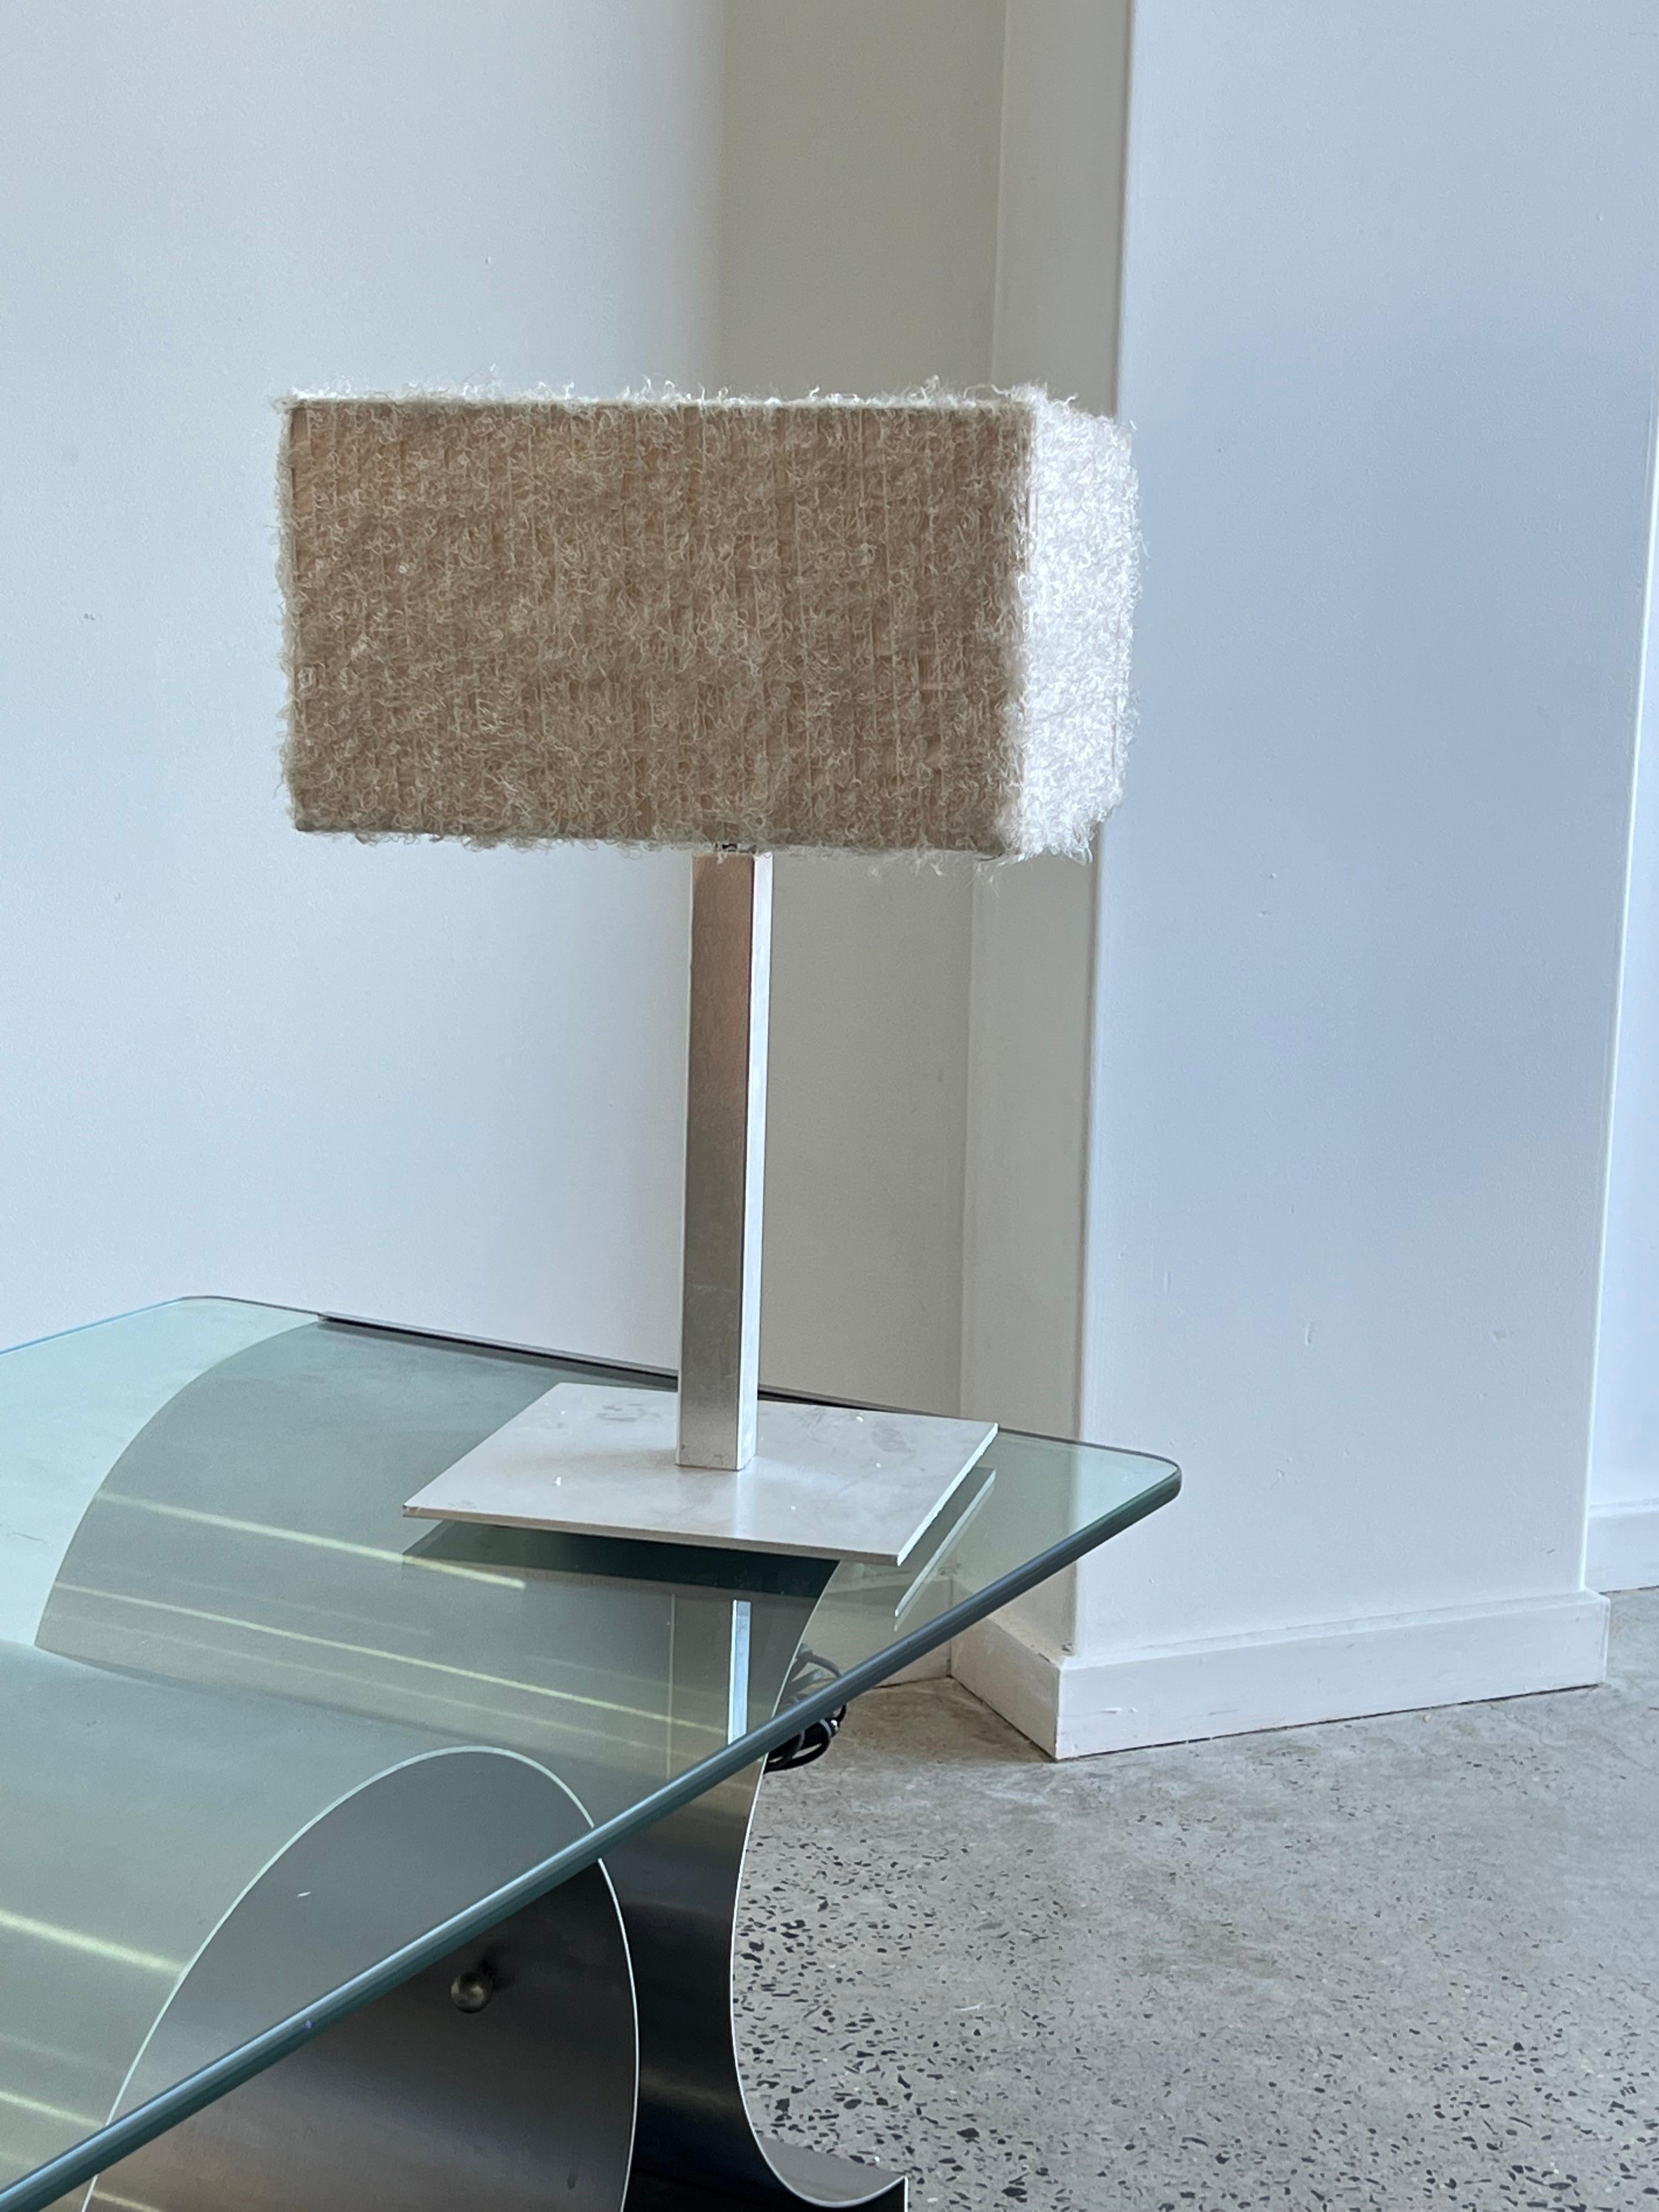 Italian Square 1980s steel table lamp.
Square shade with synthetic fluffy texture.
 